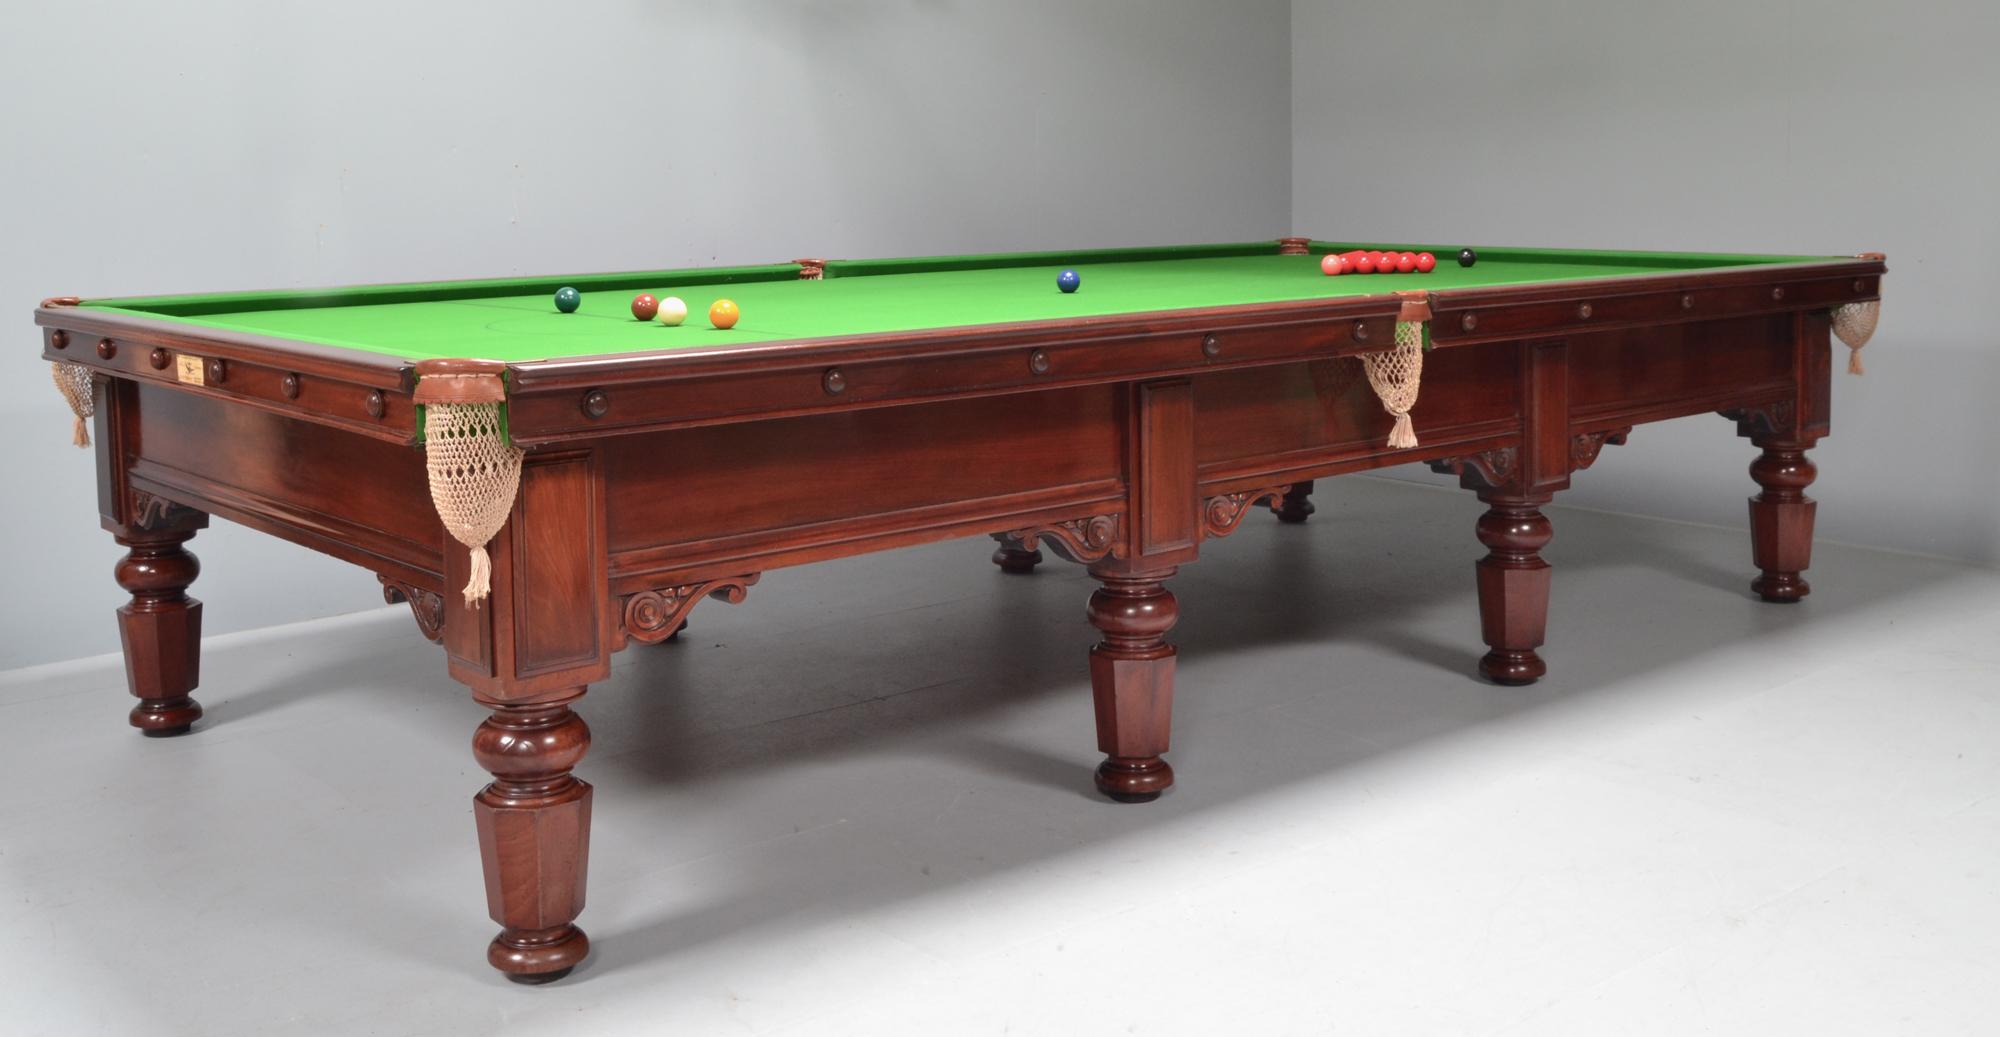 Antique Snooker table or Antique billiard table by Thurston London England.

A very good quality 'Country House